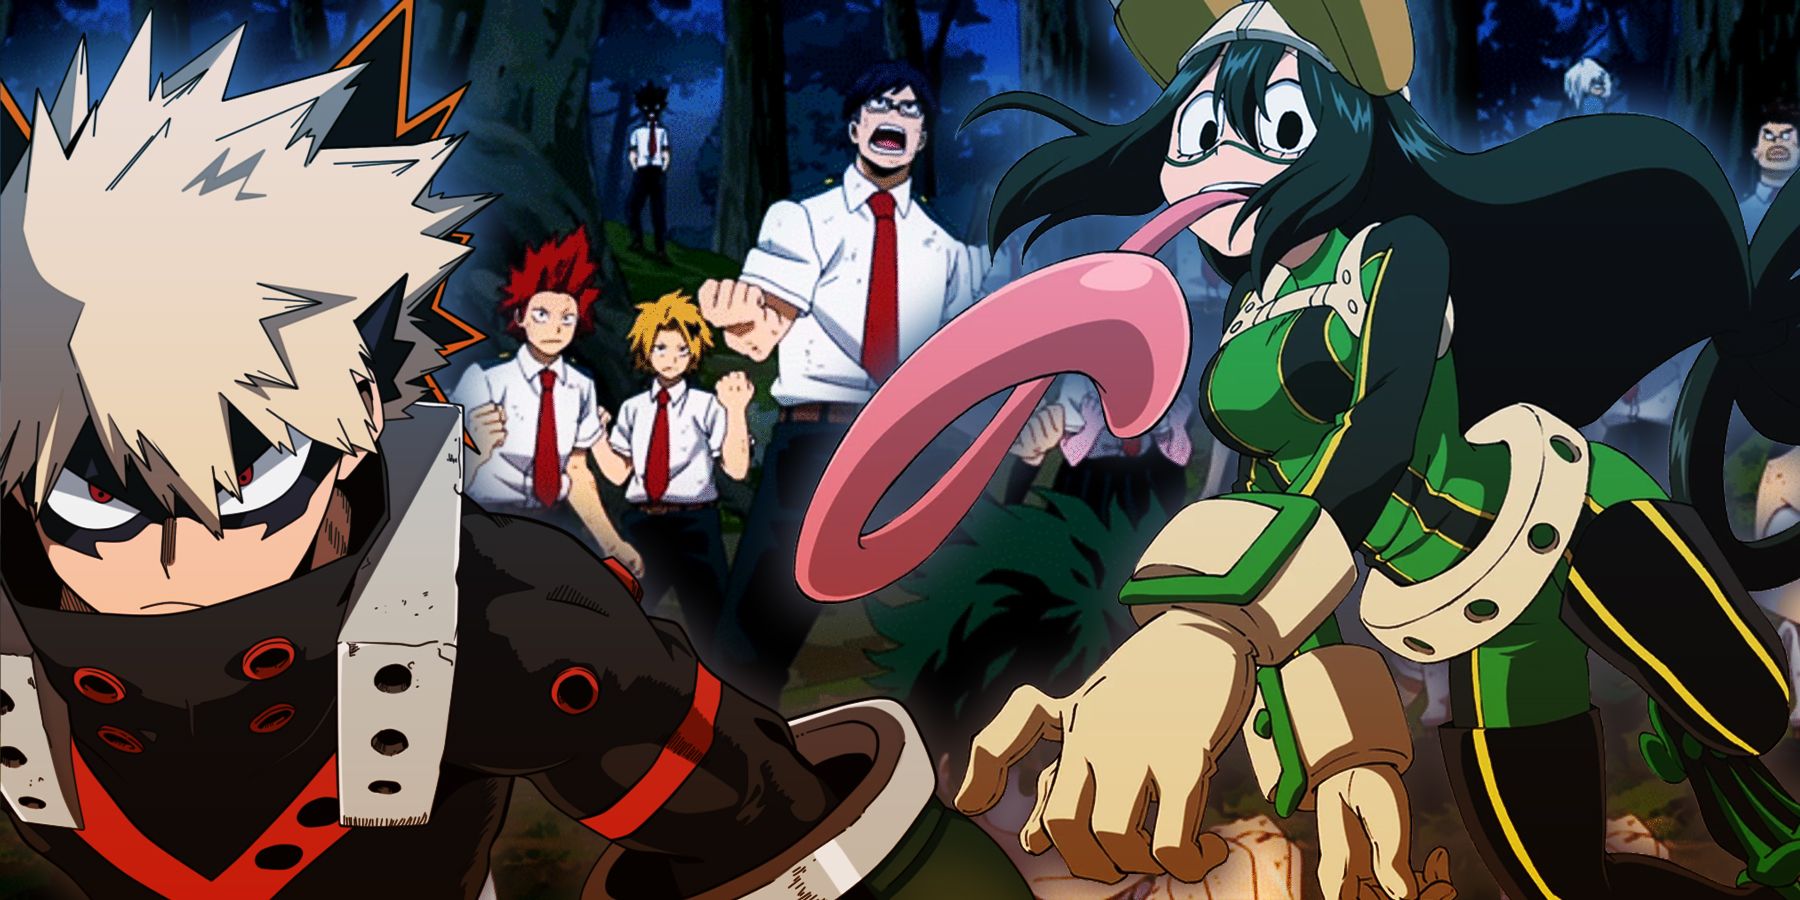 MHA's Bakugo glaring in his hero suit and Froppy leaping into action with her long tongue.